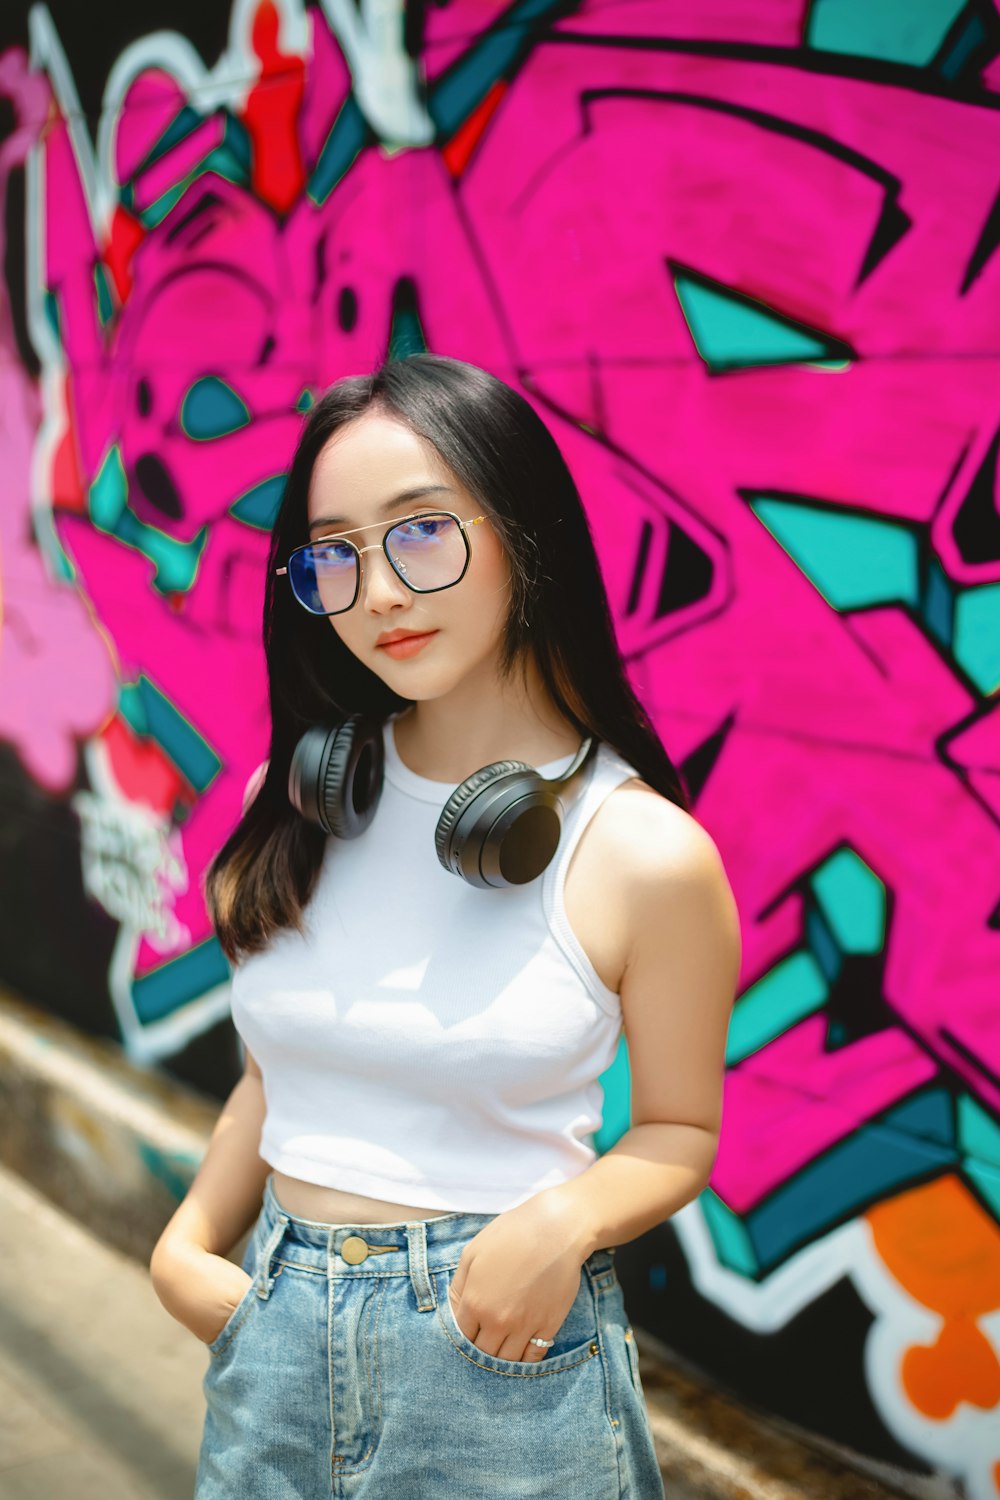 a doll wearing headphones standing in front of a graffiti wall